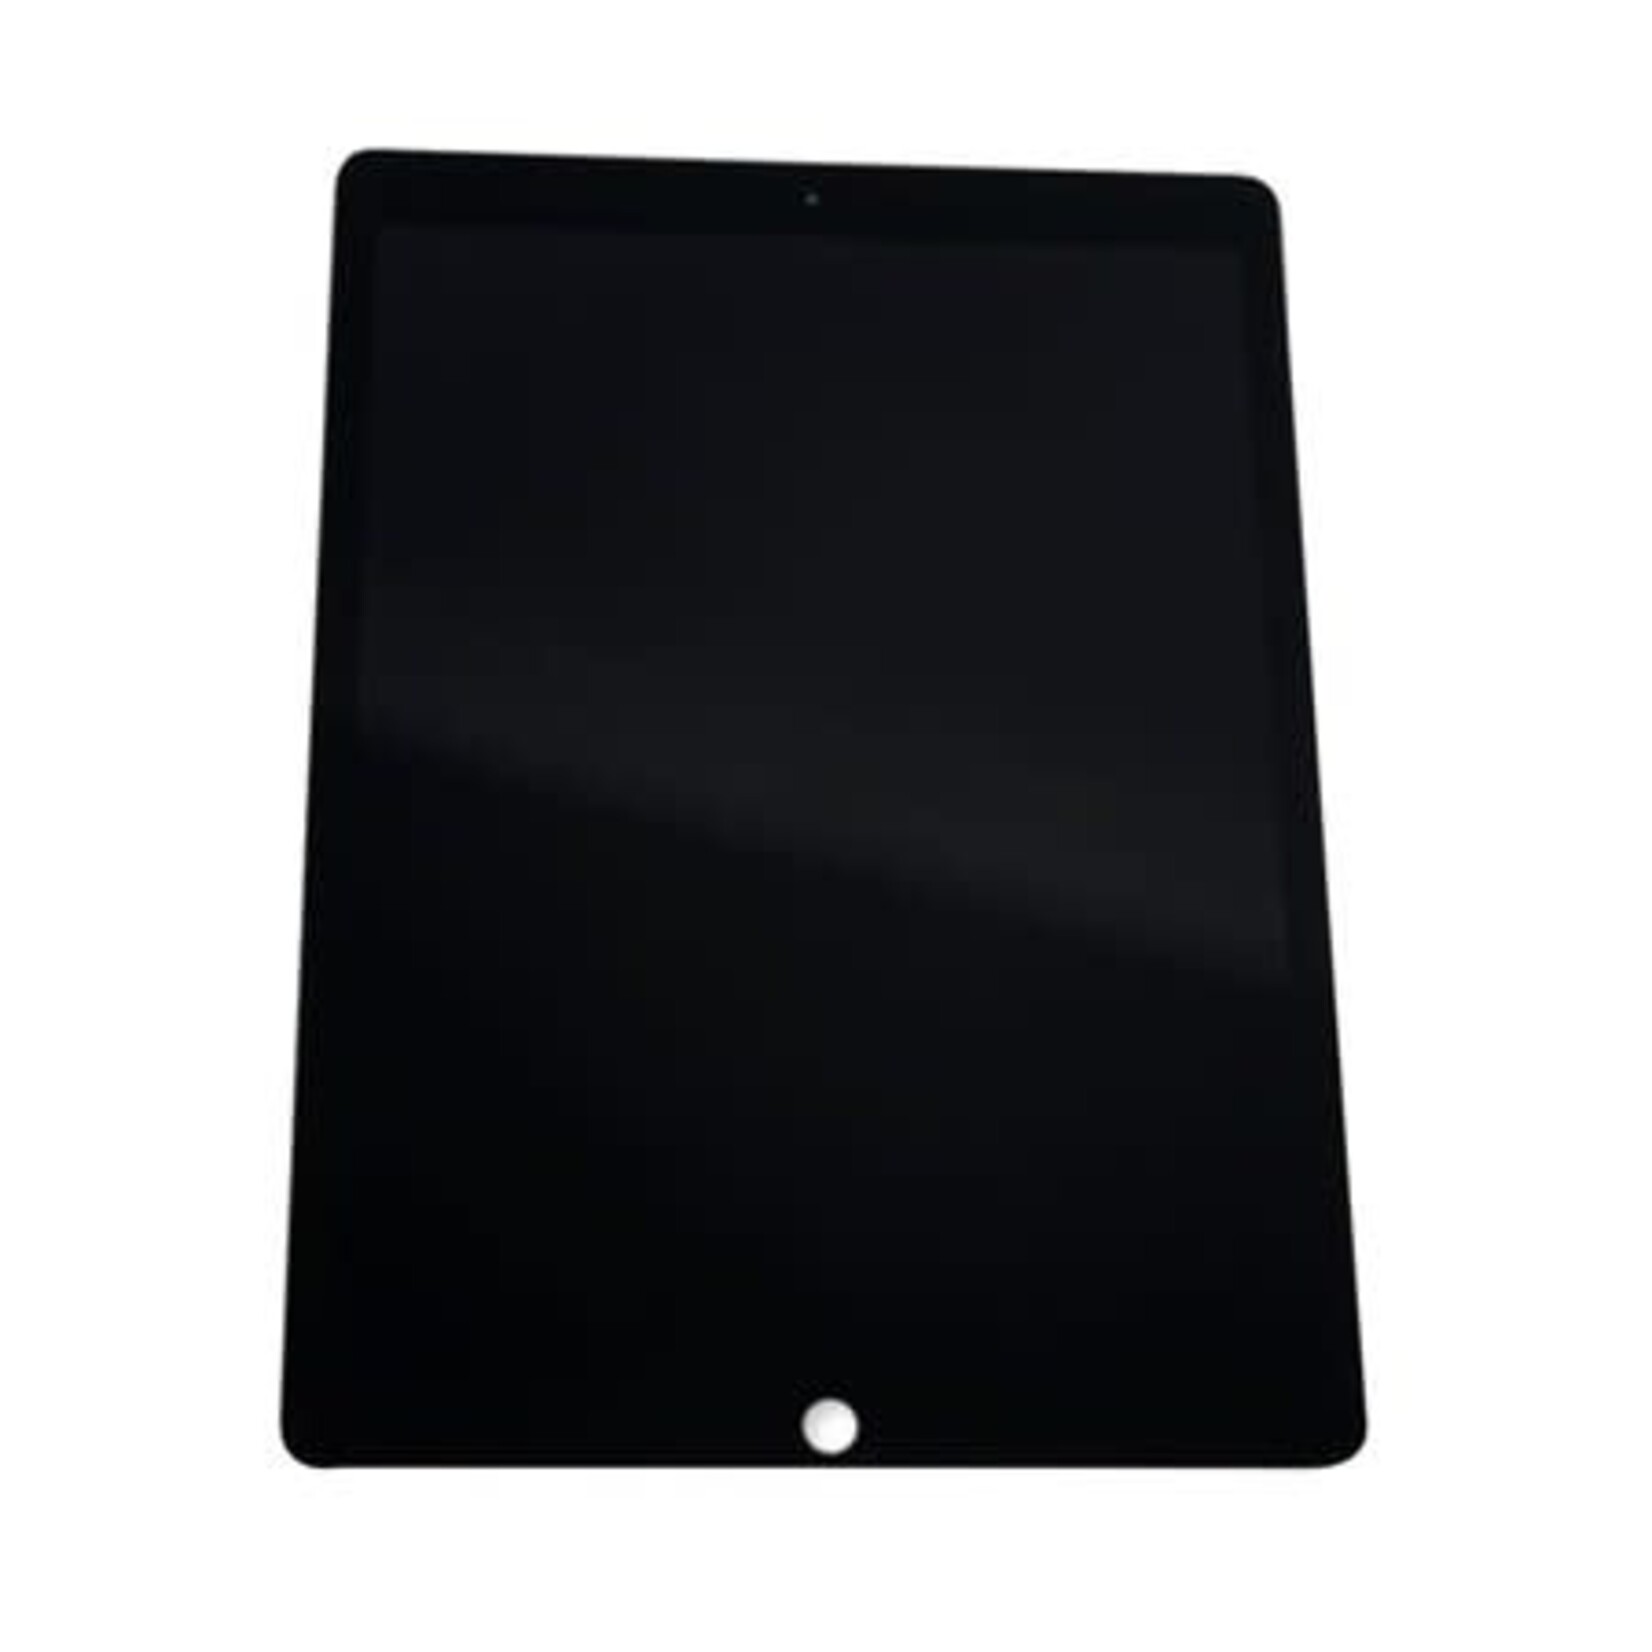 Lcd digitizer assembly IPad pro 12.9 A1584 black used